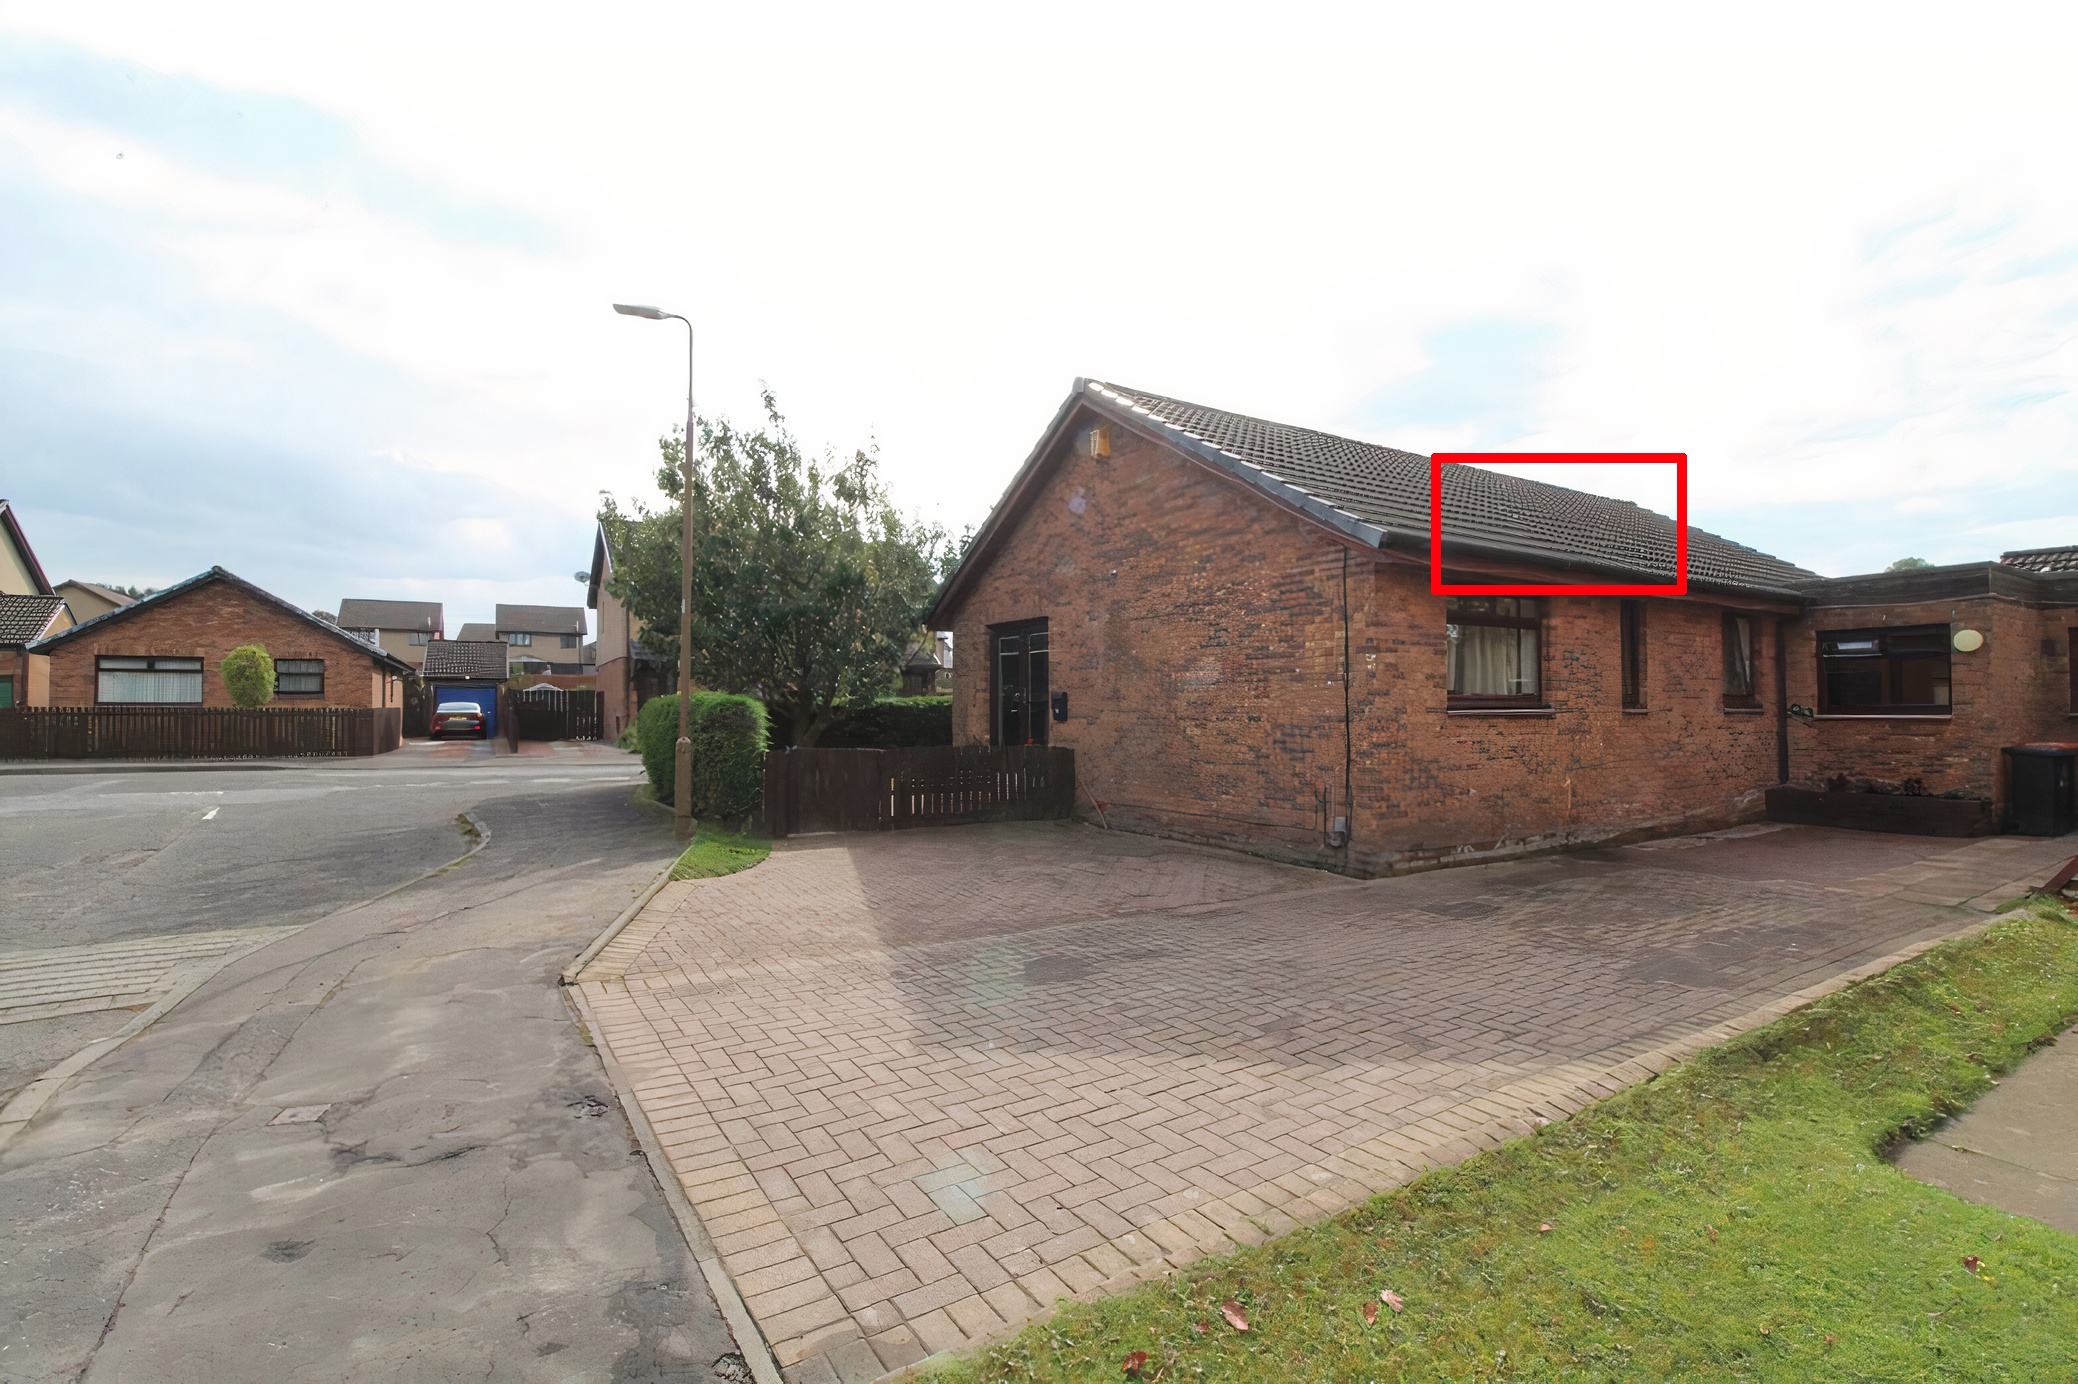 A photograph from the property's listing with the dip in roof outlined.